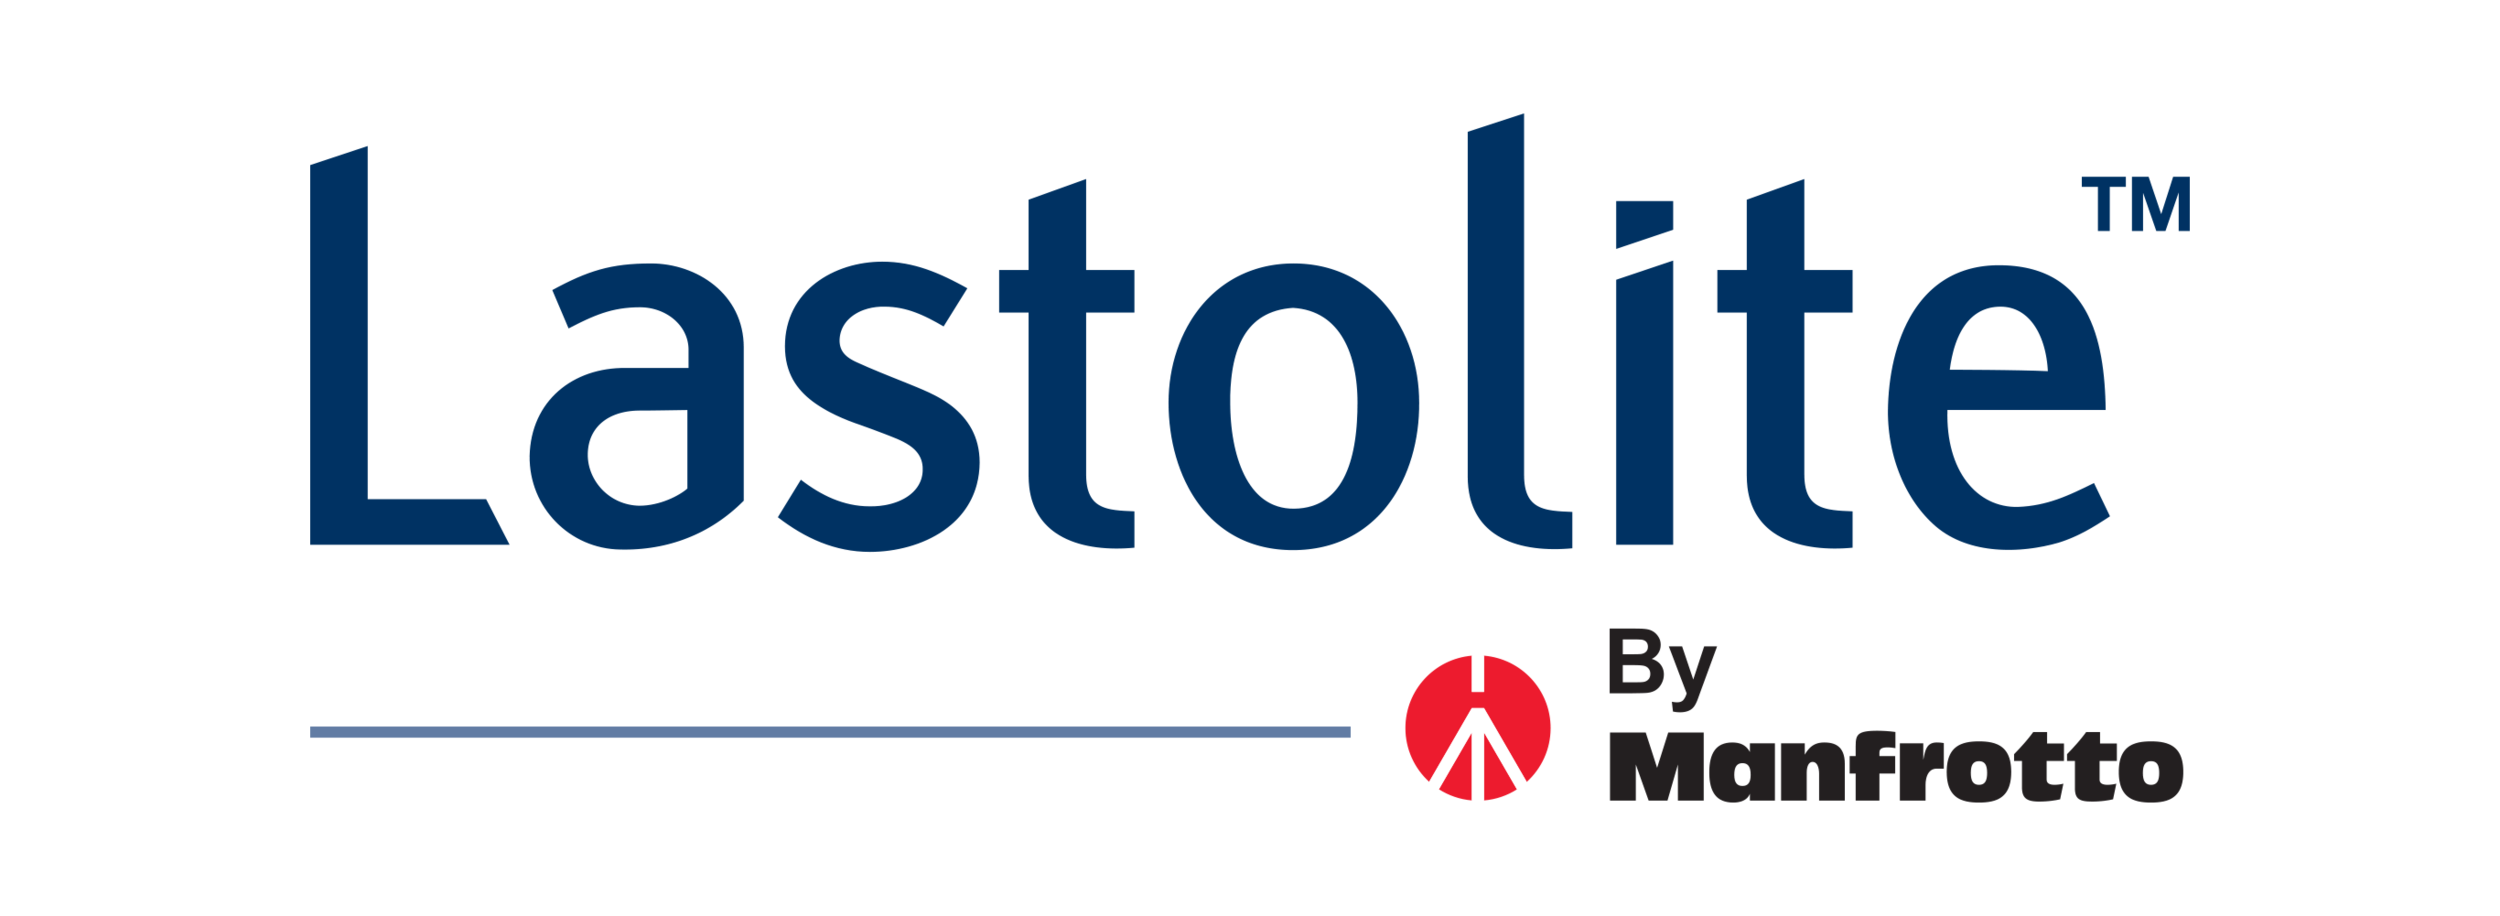 LASTOLITE_BY_MANFROTTO_LOGO_B_AVERAGE_COLOUR.png